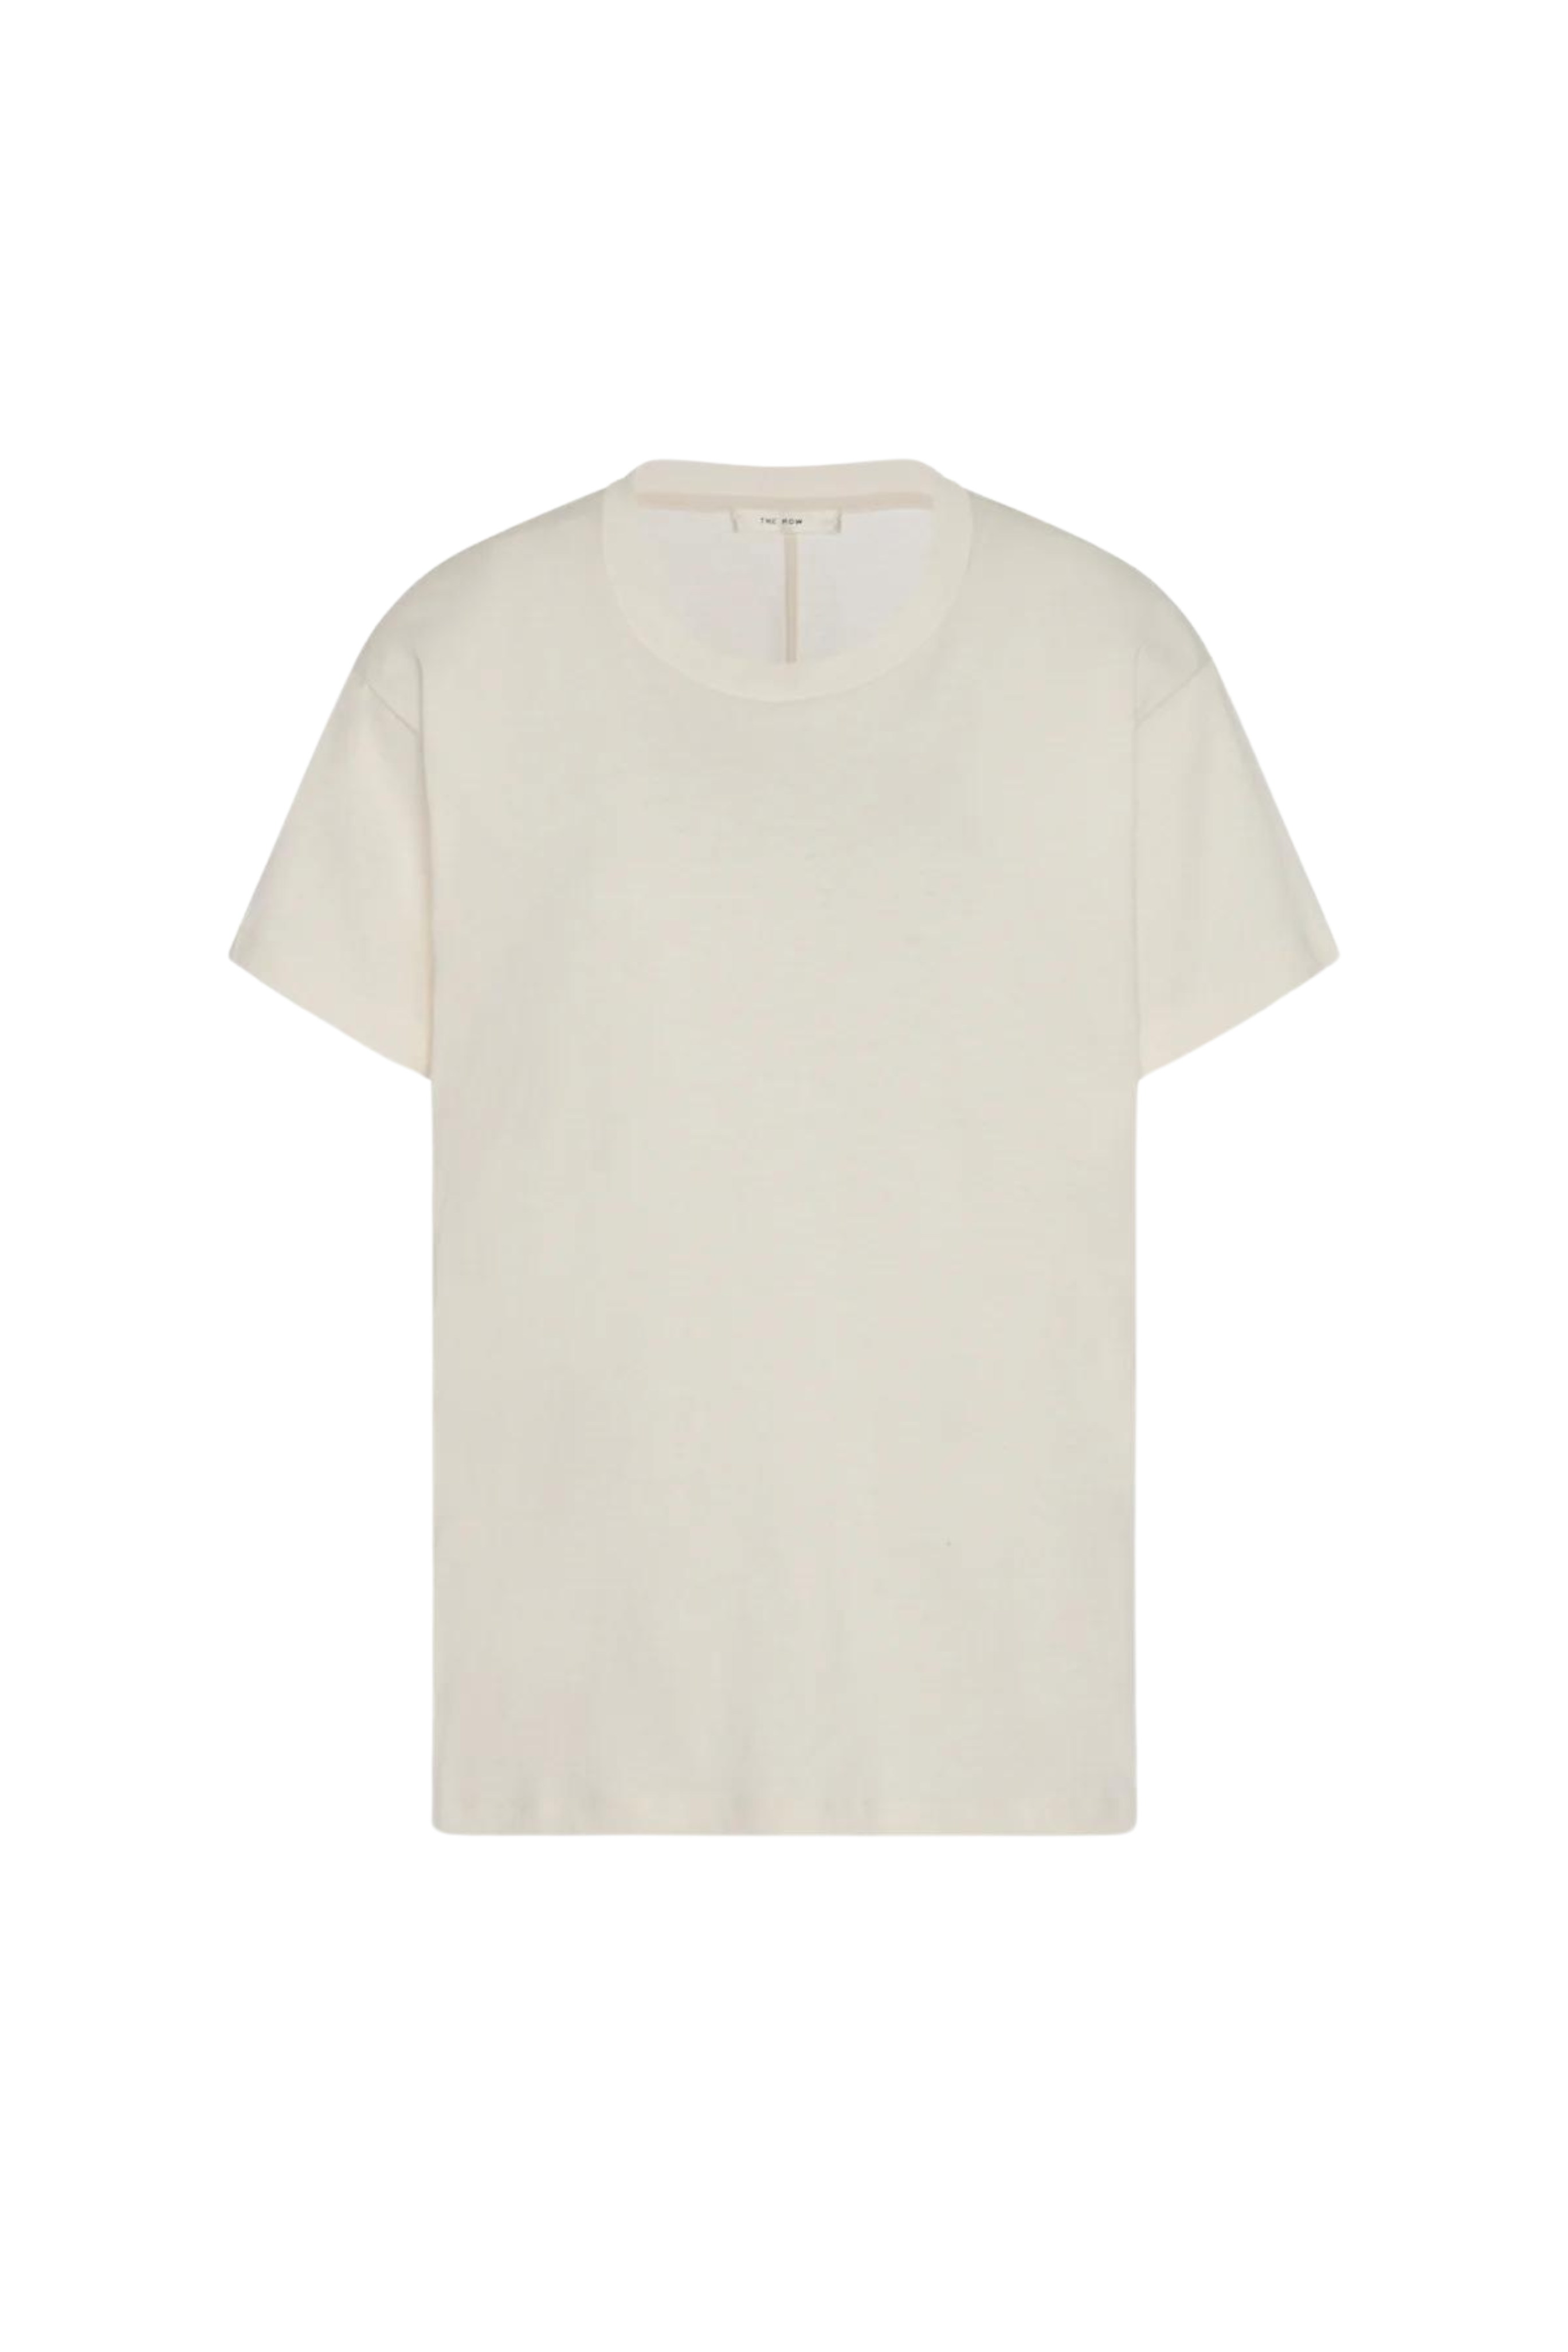 Blaine Top in Ivory